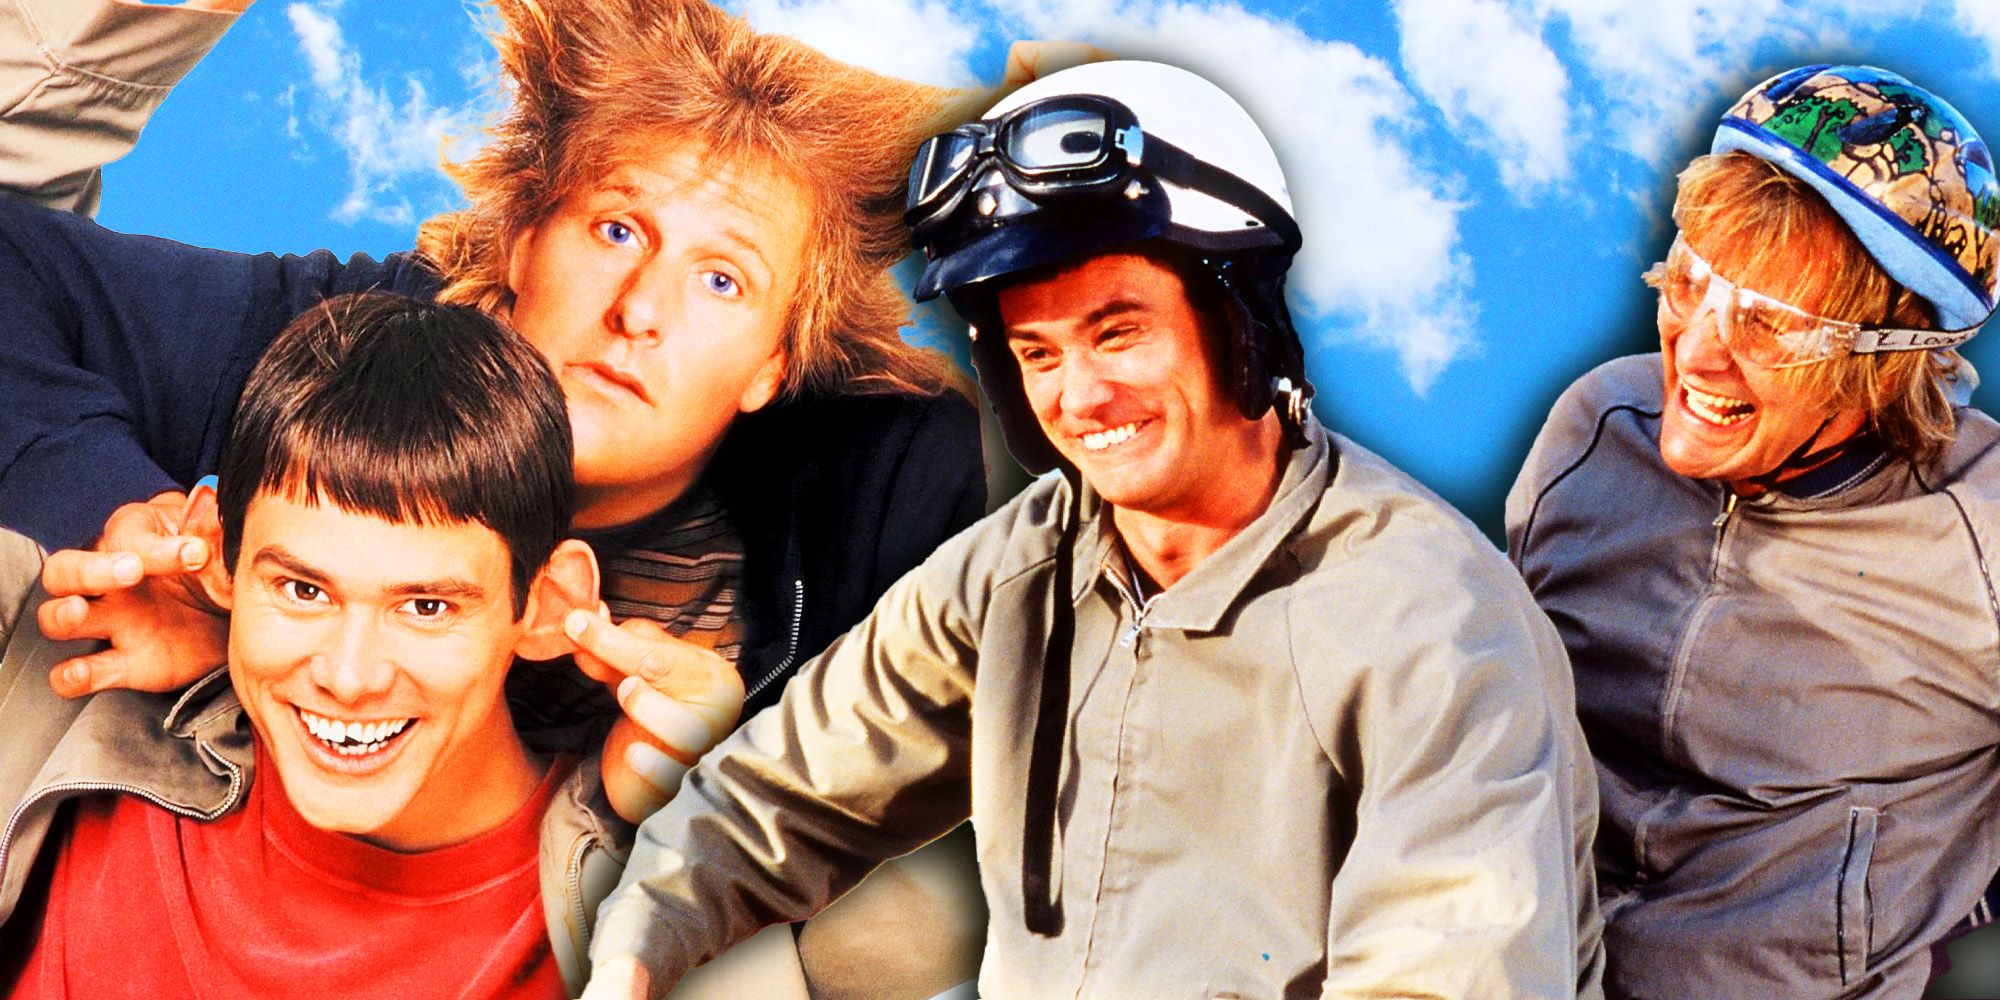 Collage of Harry and Lloyd from Dumb and Dumber